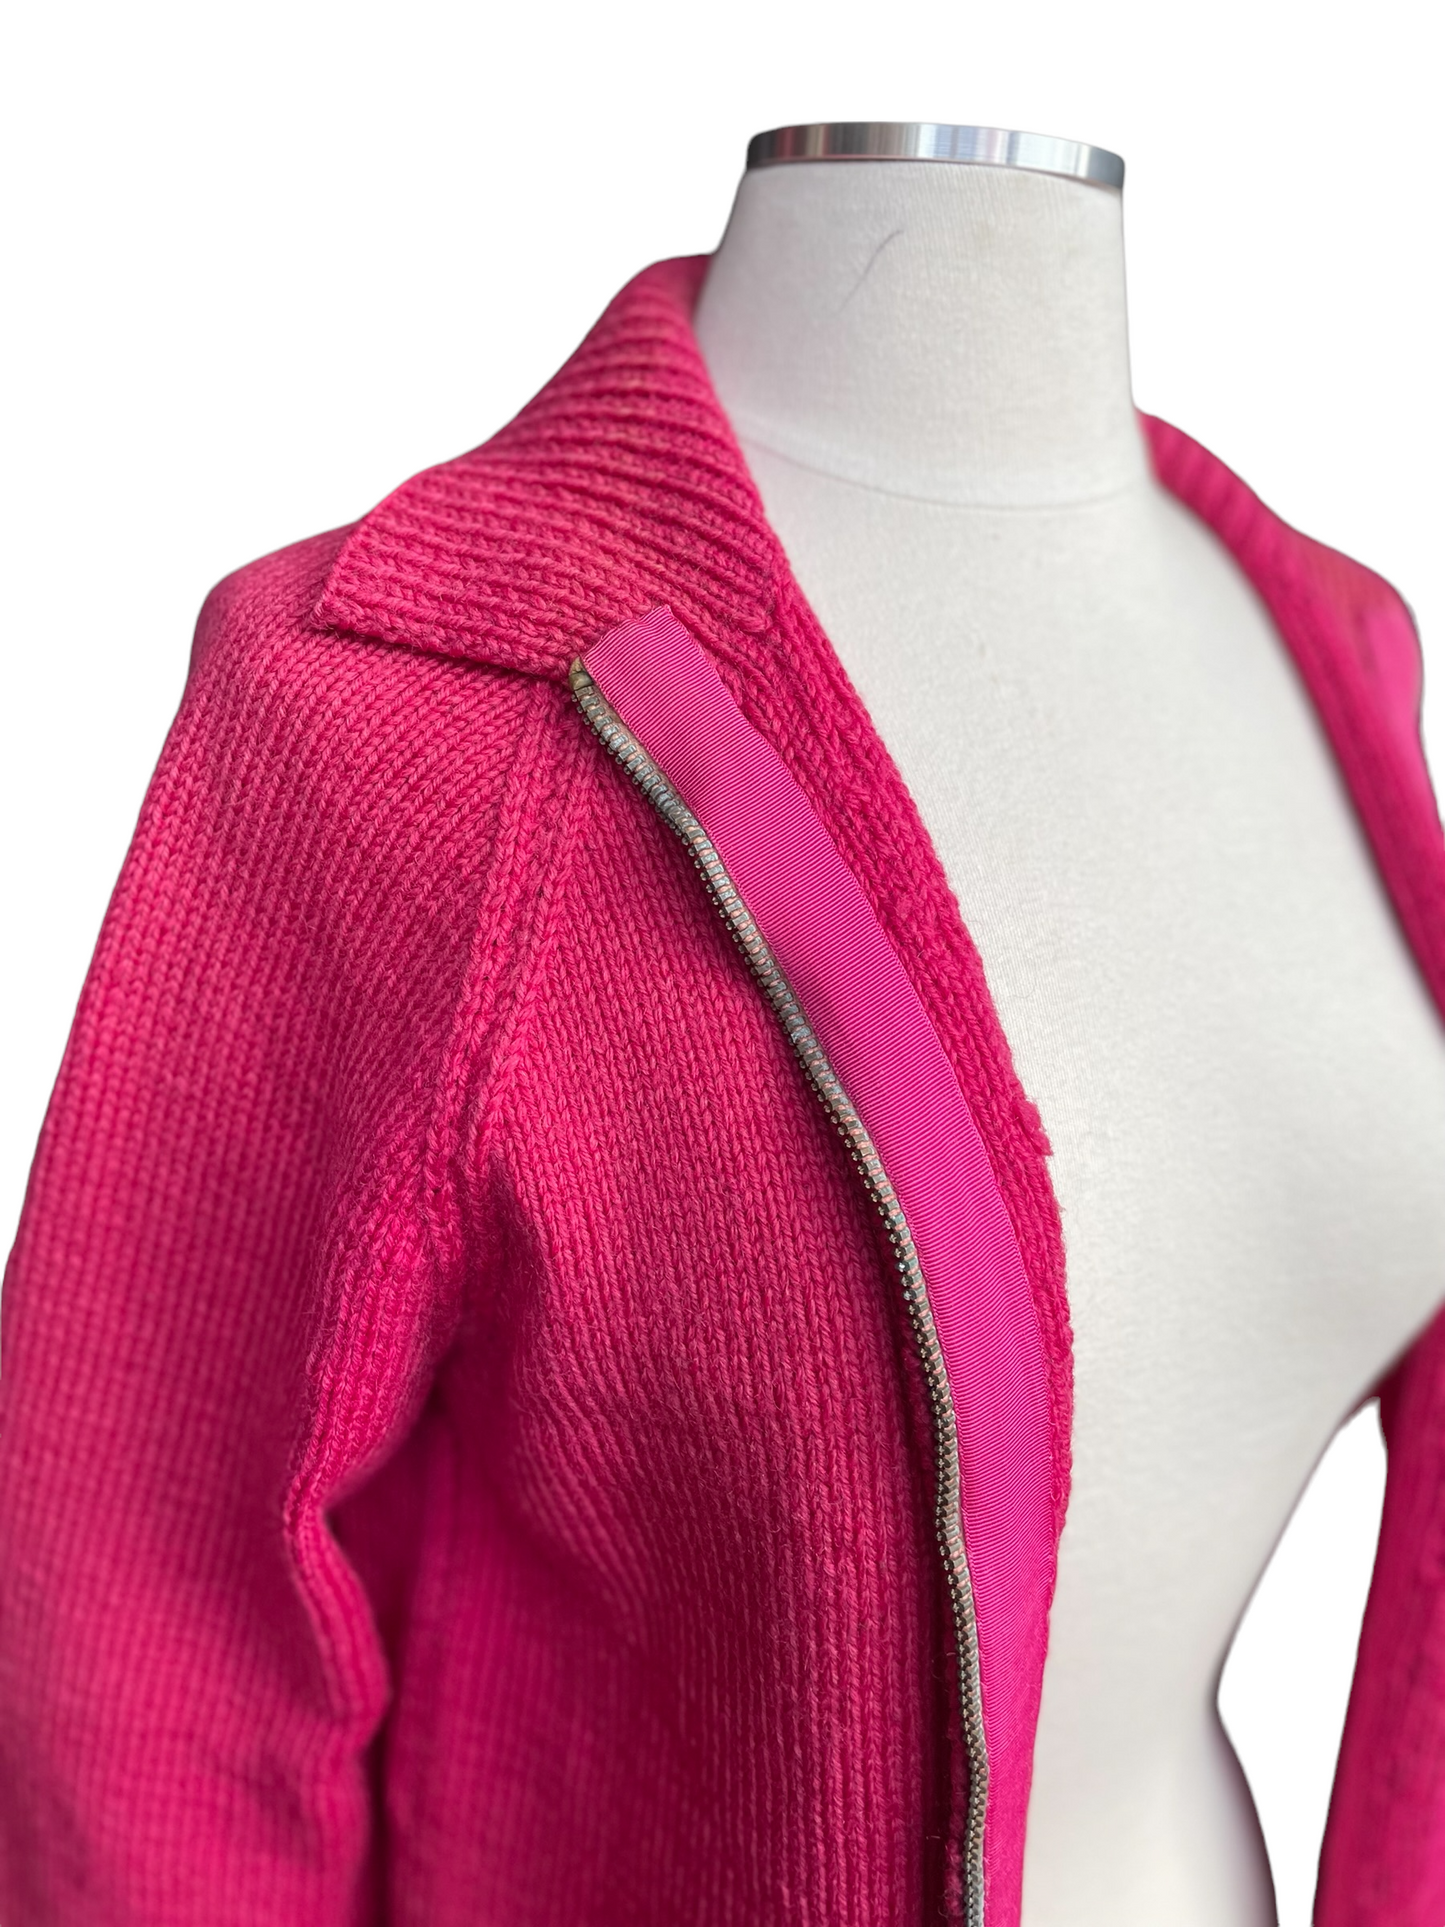 Right shoulder open zipper view minor collar discolorationVintage 1940's Wool Hand Knit Magenta Zip Up Cardigan Sweater | Barn Owl Vintage | Seattle True Vintage